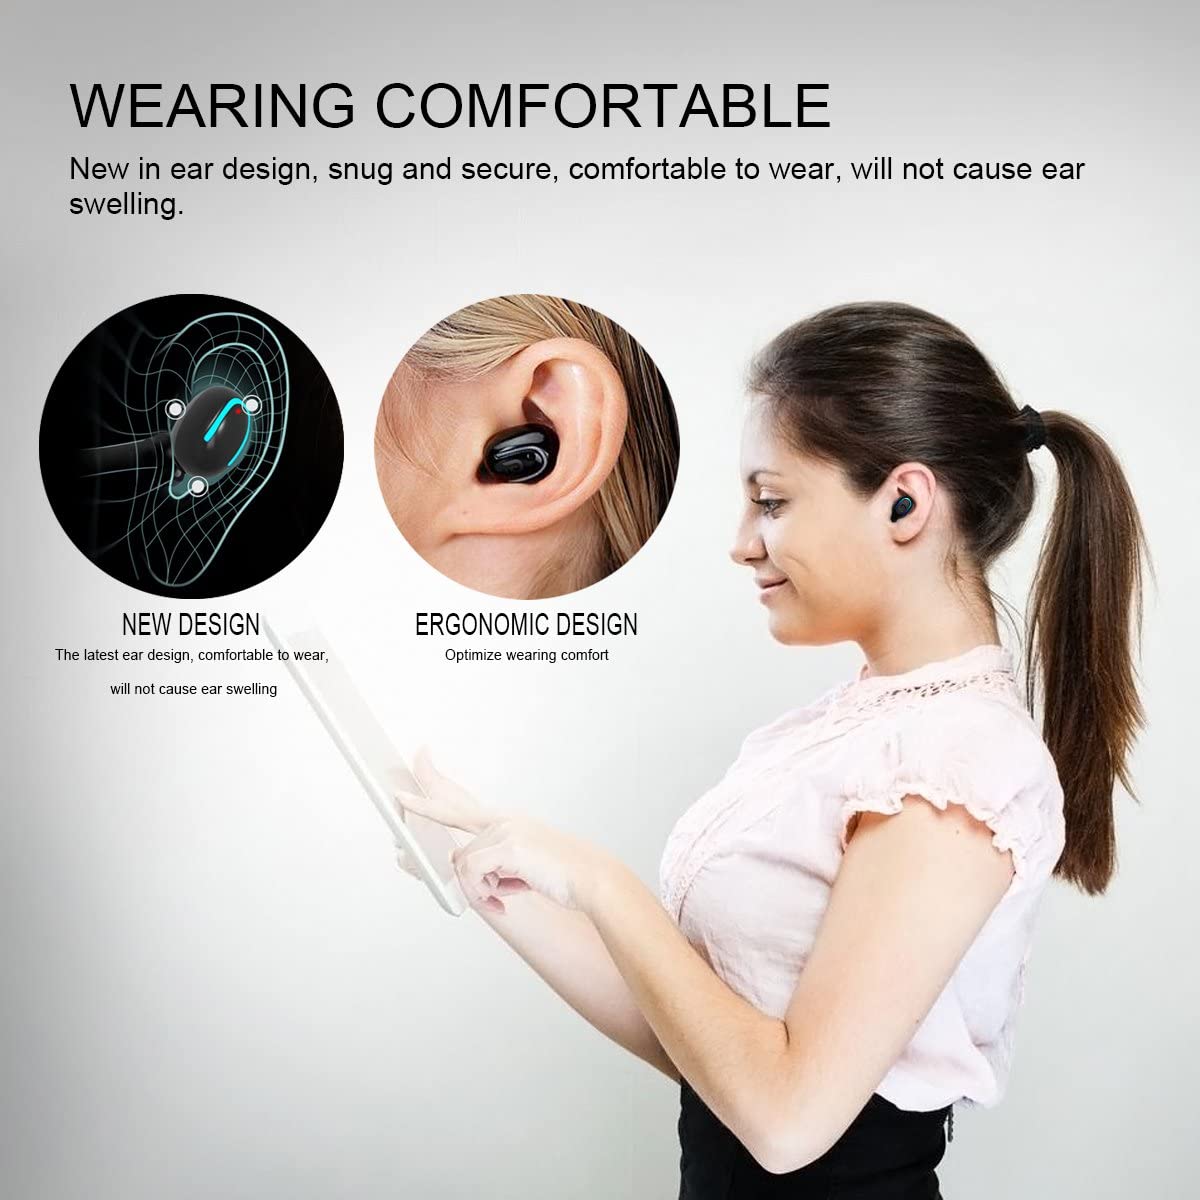 Bluetooth Earpiece Wireless Headphone Mini Invisible Earbud, 6 Hrs Playtime Tiny Smallest Headset Single Car Earphone with Mic for iPhone Samsung Galaxy (1 Piece) - image 5 of 7